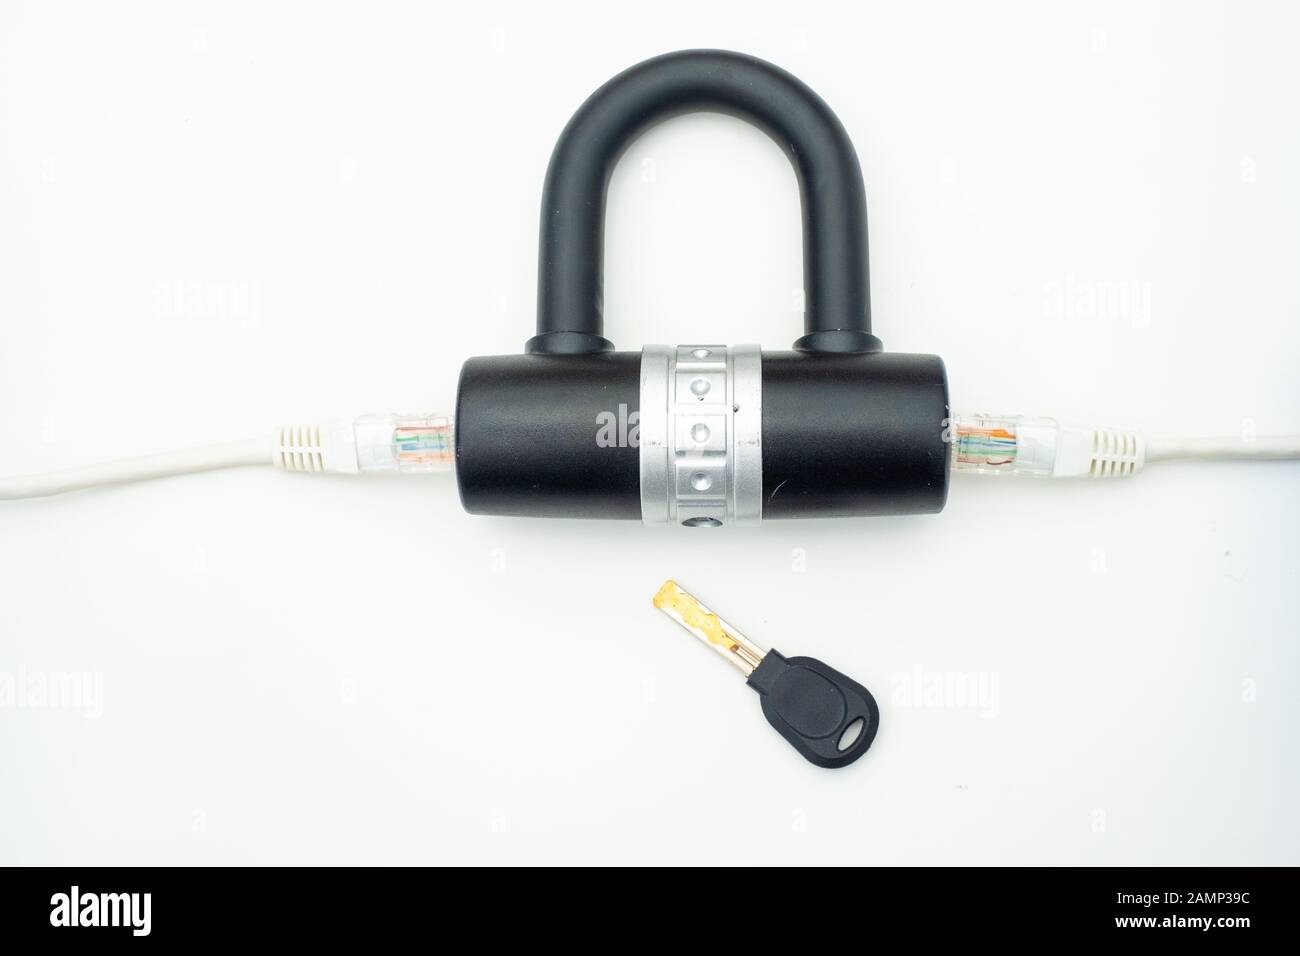 Two computer network cables going through a lock with a key, depicting digital security, cybersecurity or internet security concepts Stock Photo